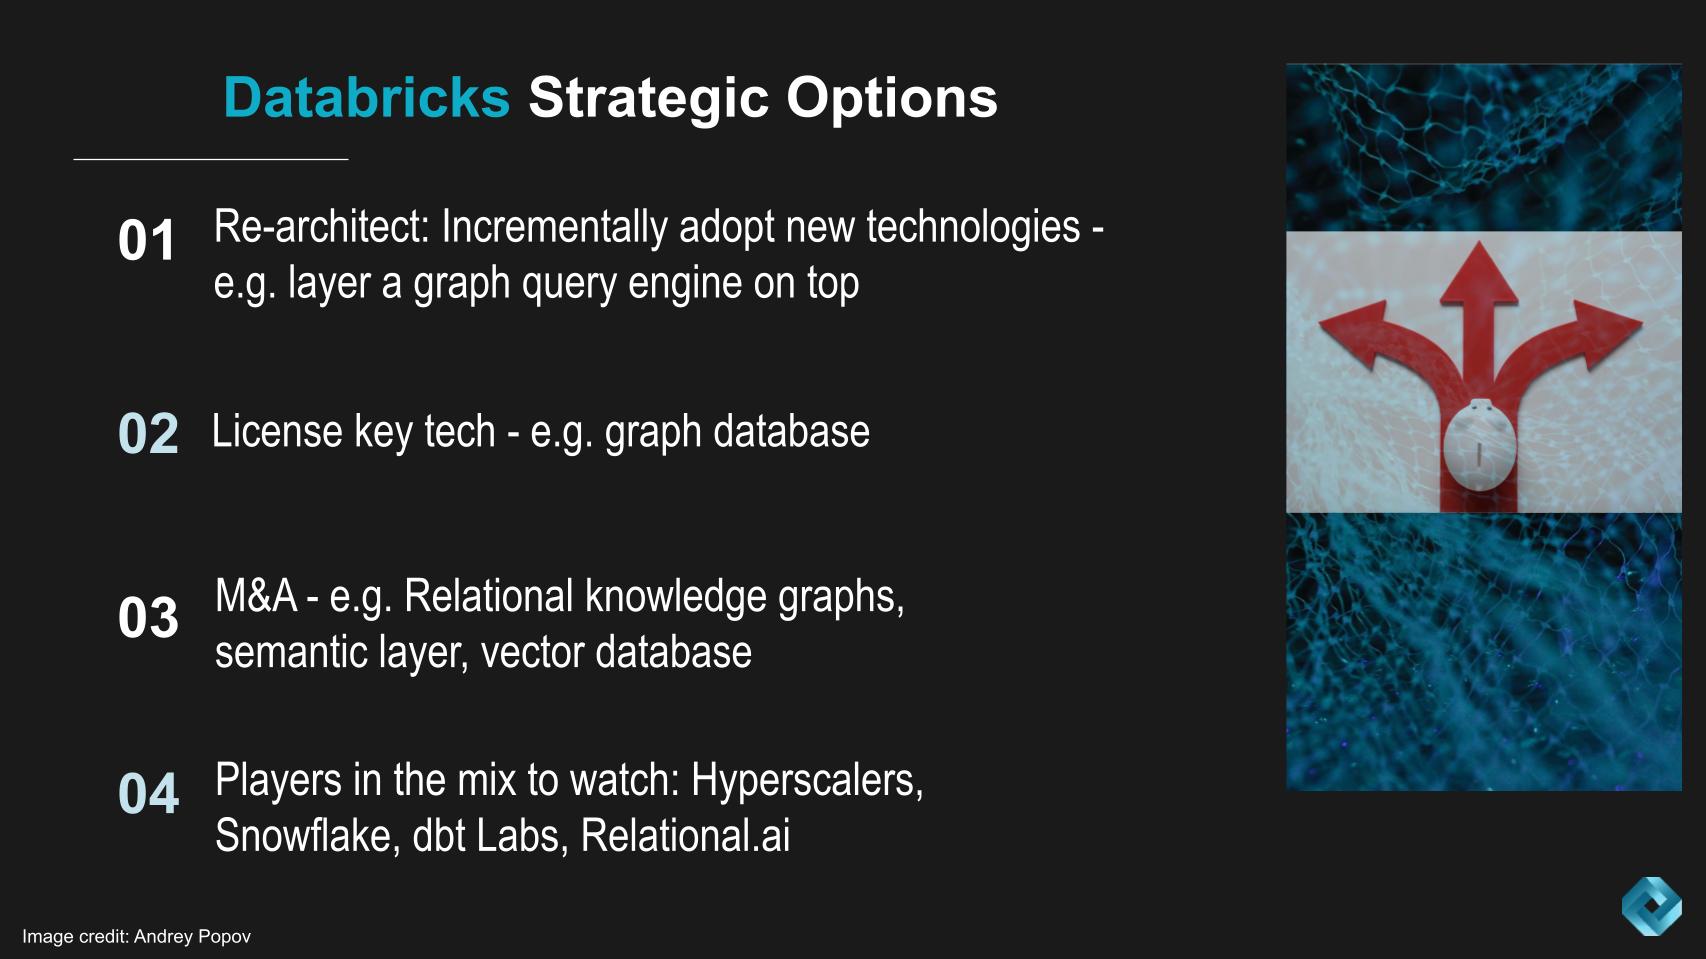 Databricks faces critical strategic decisions. Here’s why.